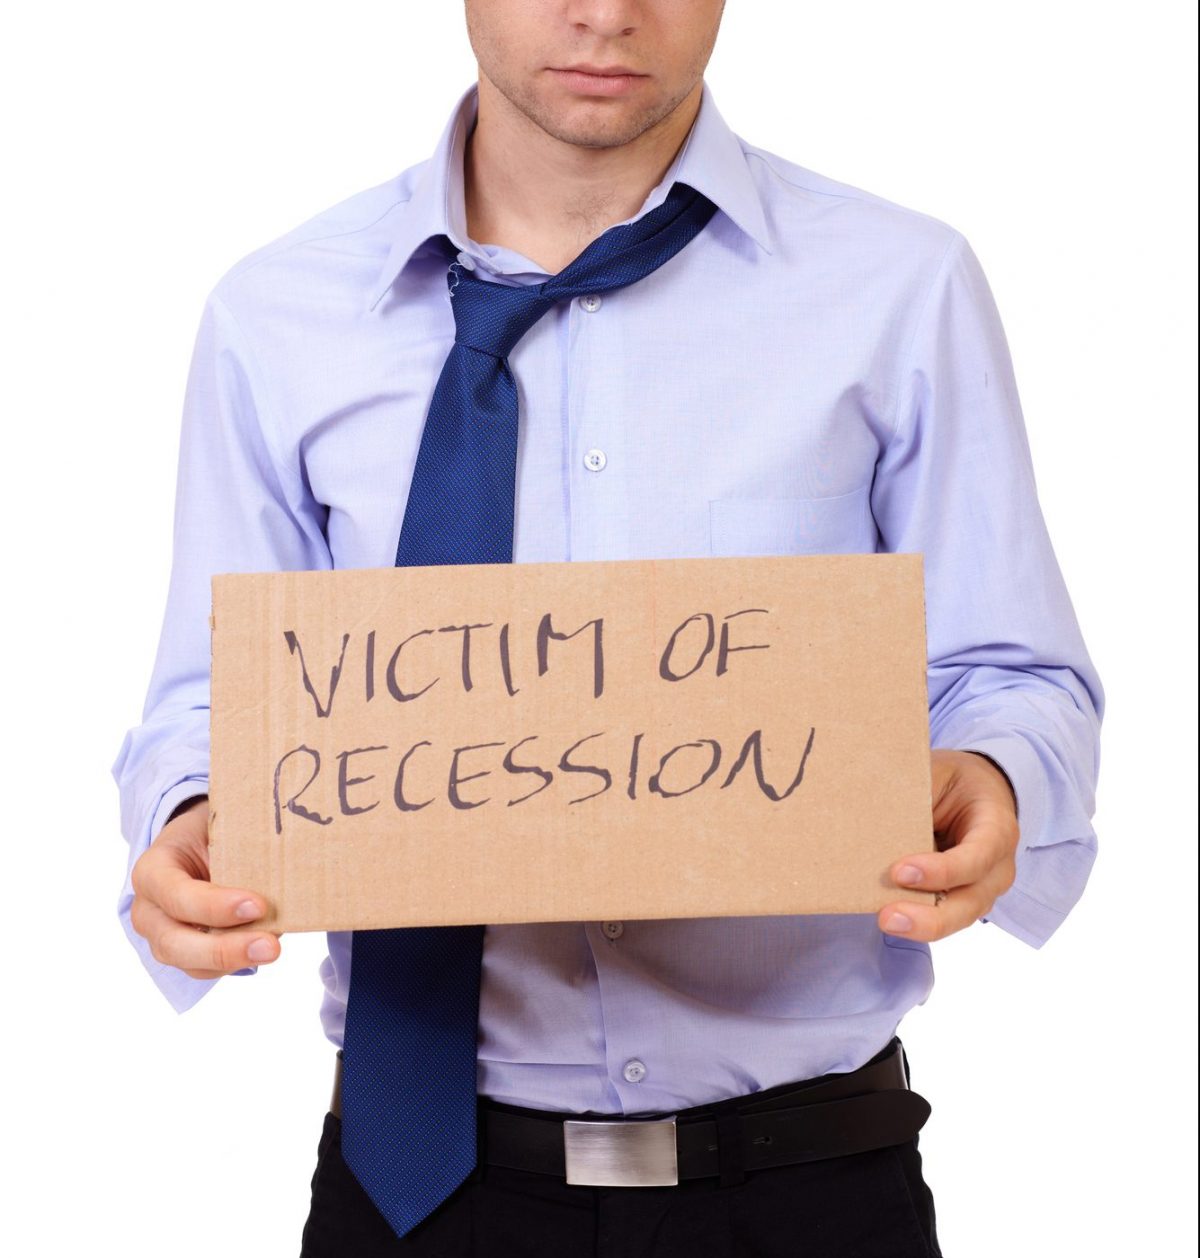 White Collar Recession What It Is and Why It Matters StartUp Mindset